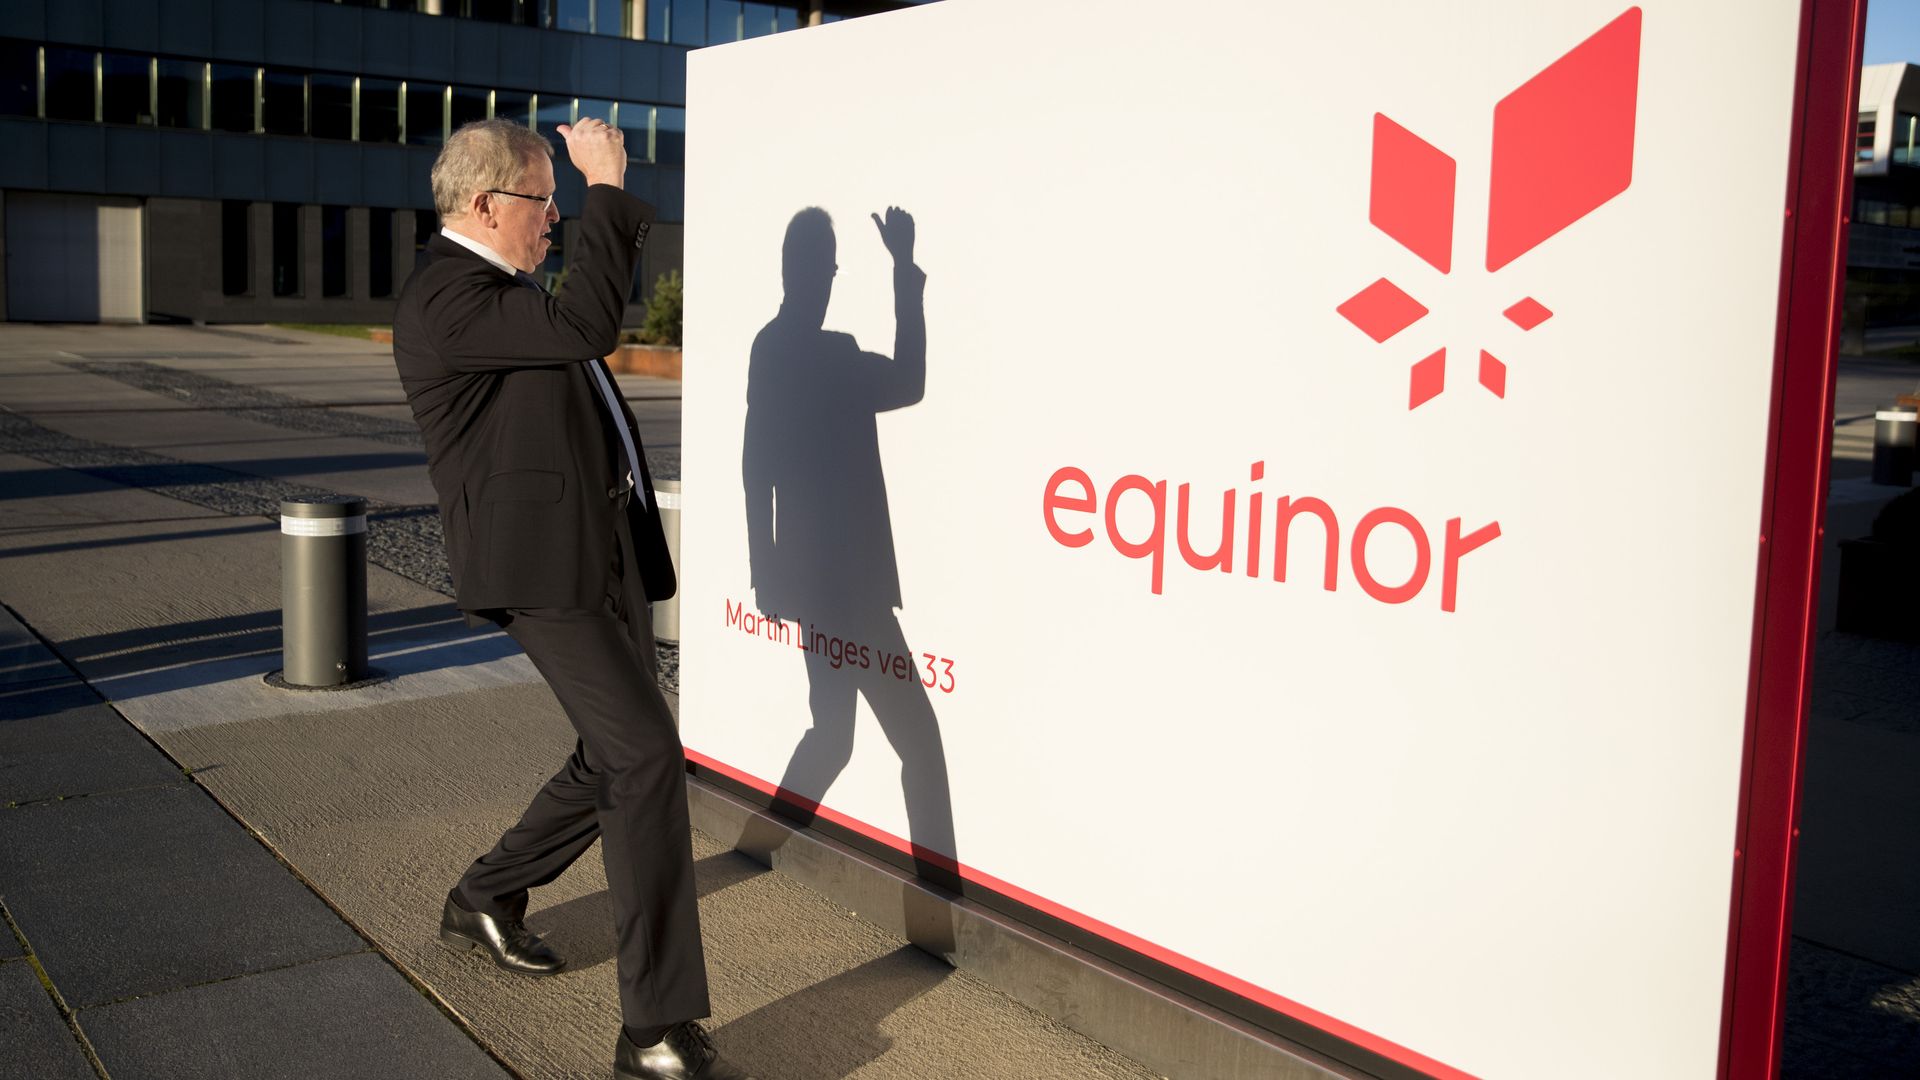 In this image, a suited man shields his face from the sun and looks at his own shadow reflected on a billboard with the Equinor logo on it. 